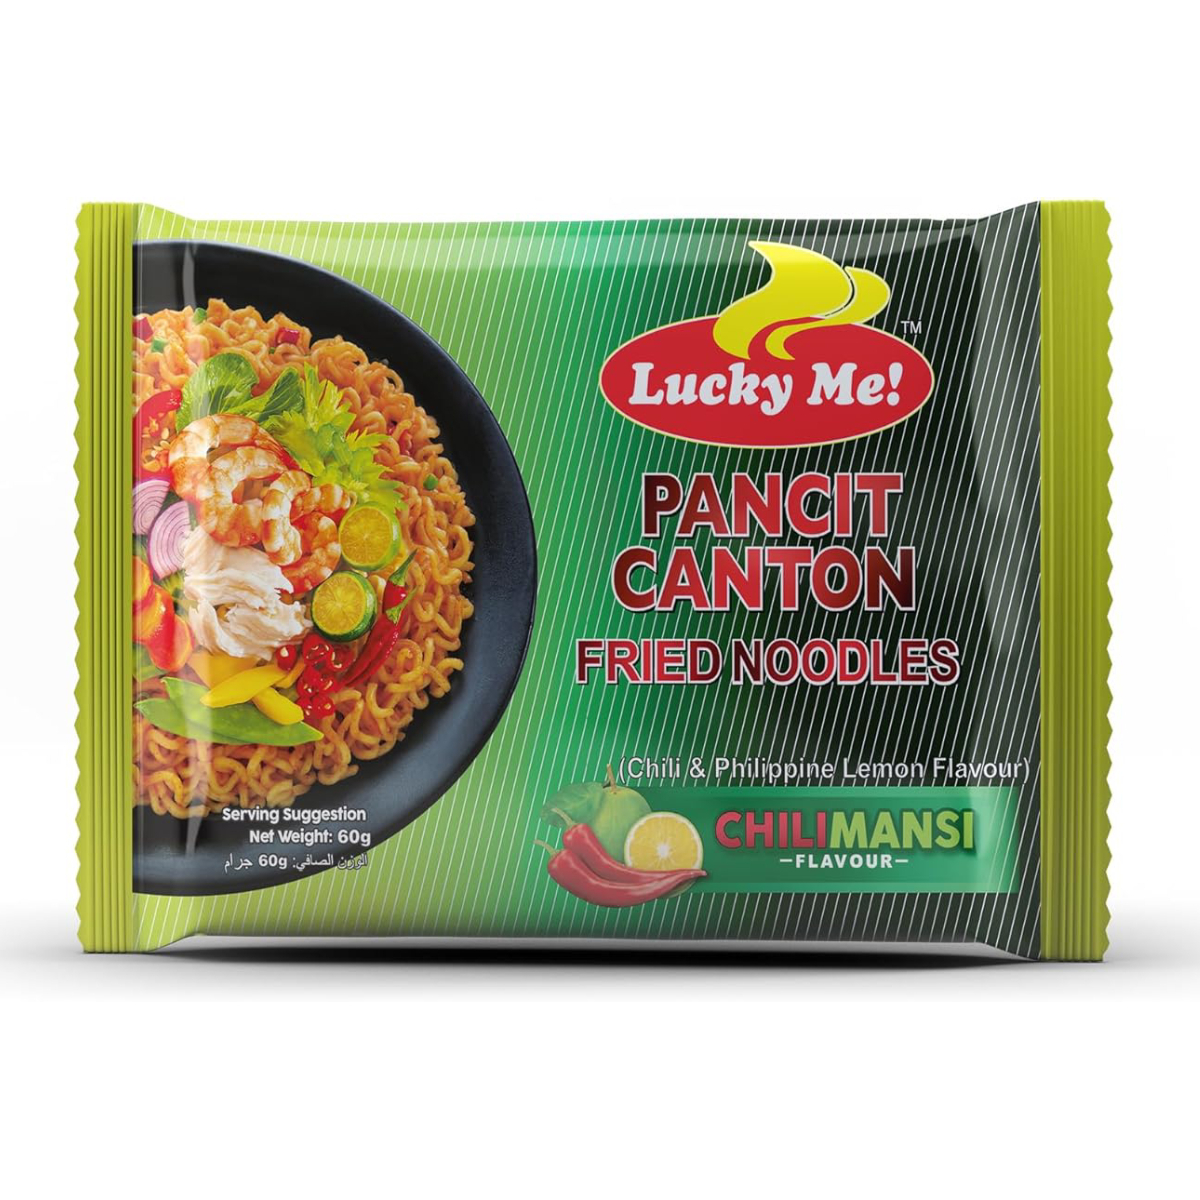 Lucky Me Chili Mansi Flavour Instant Pancit Canton 6 x 60 g